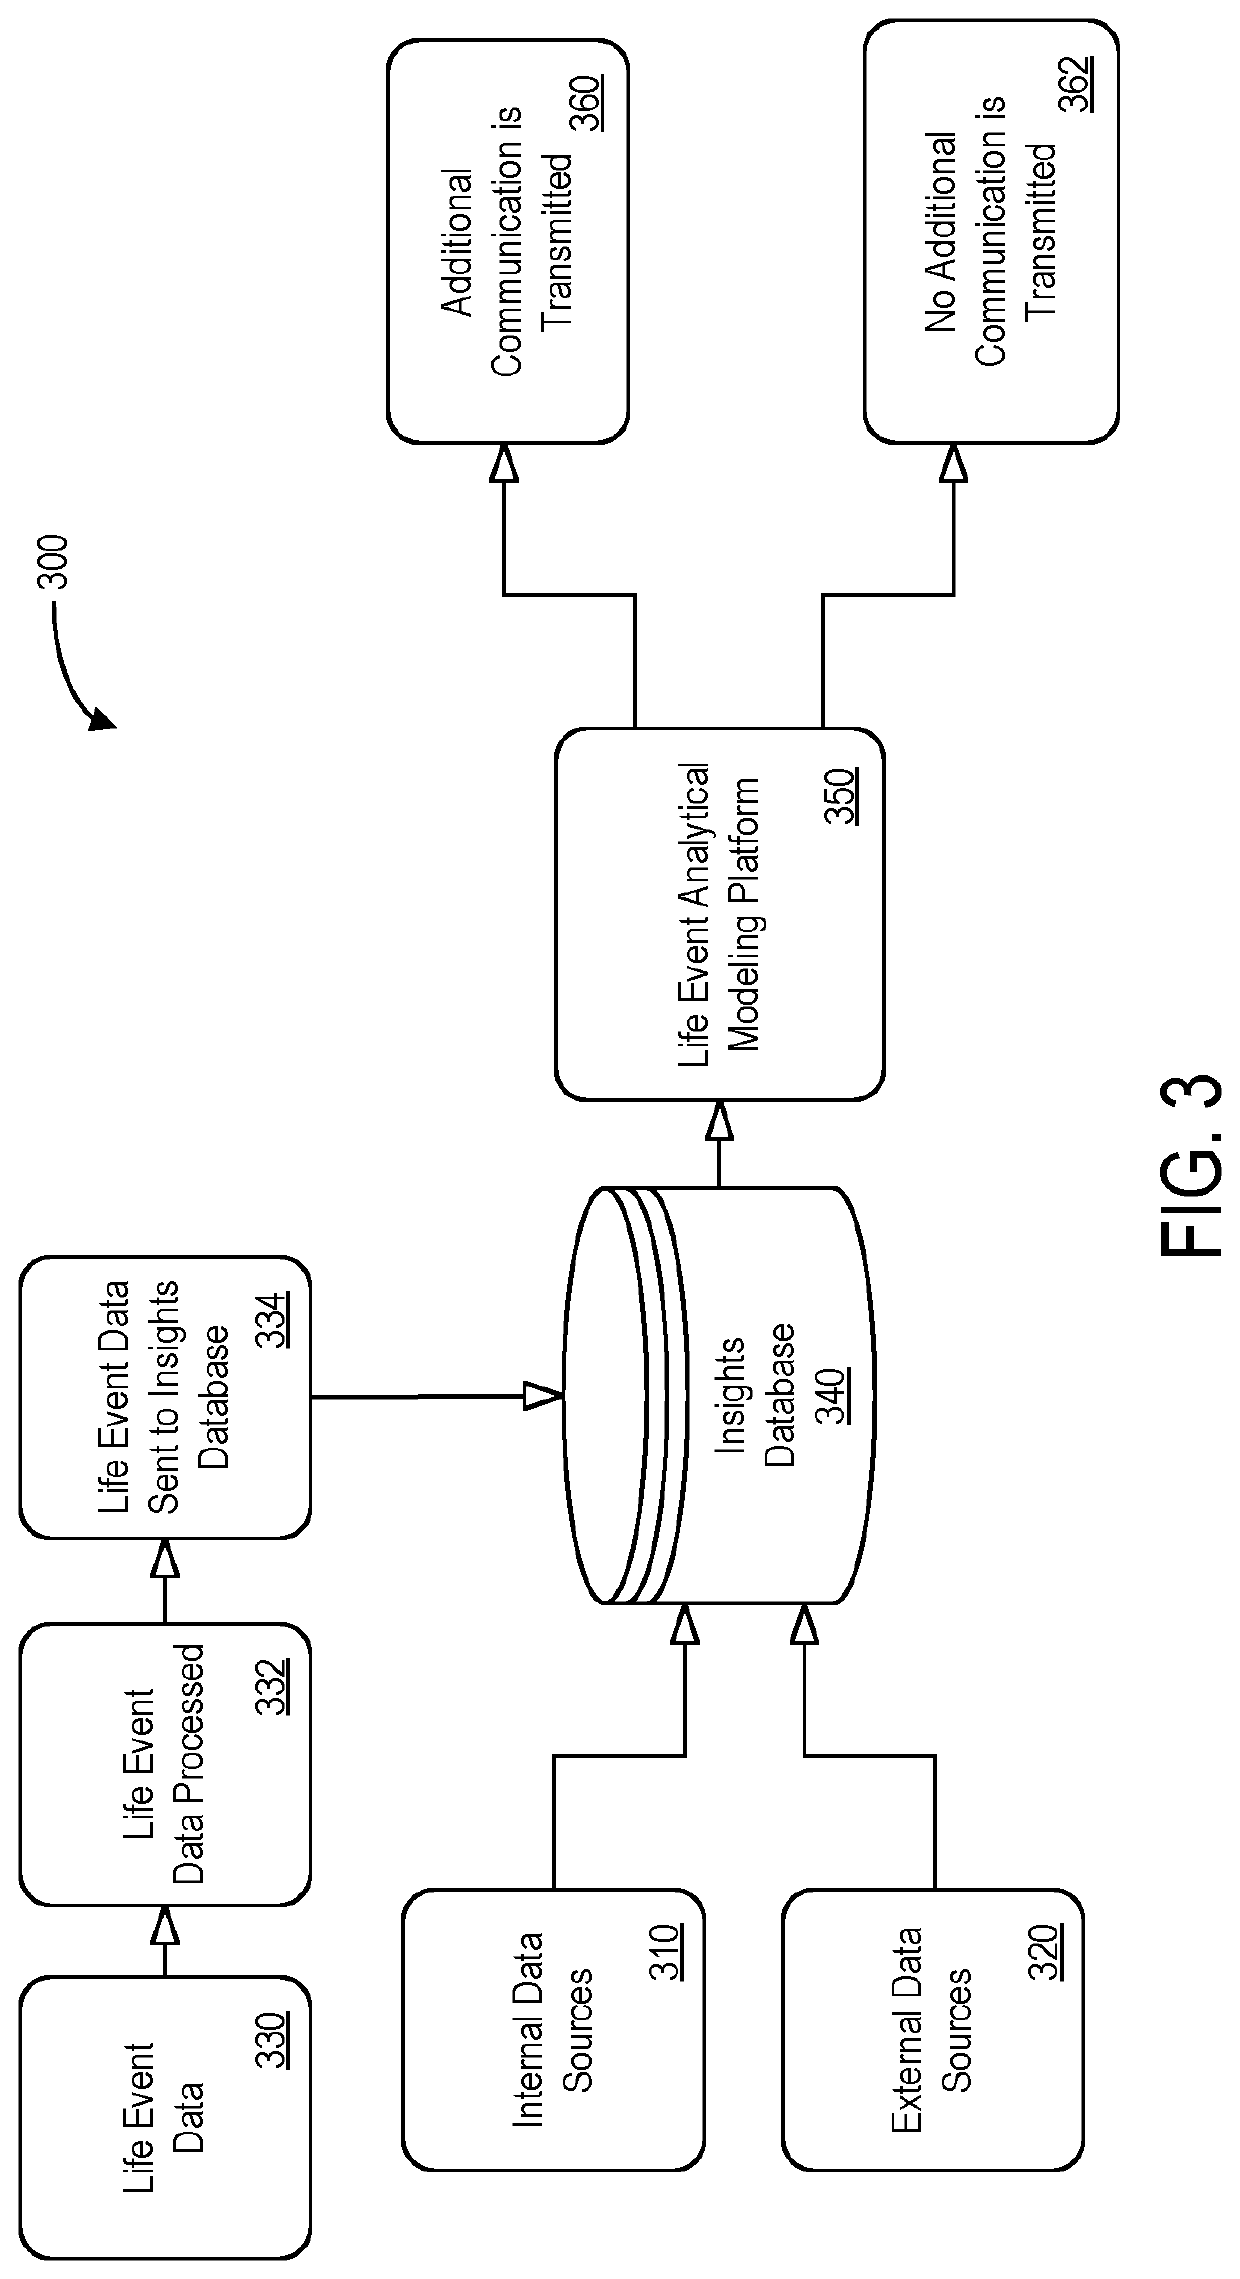 System and method using third-party data to provide risk relationship adjustment recommendation based on upcoming life event